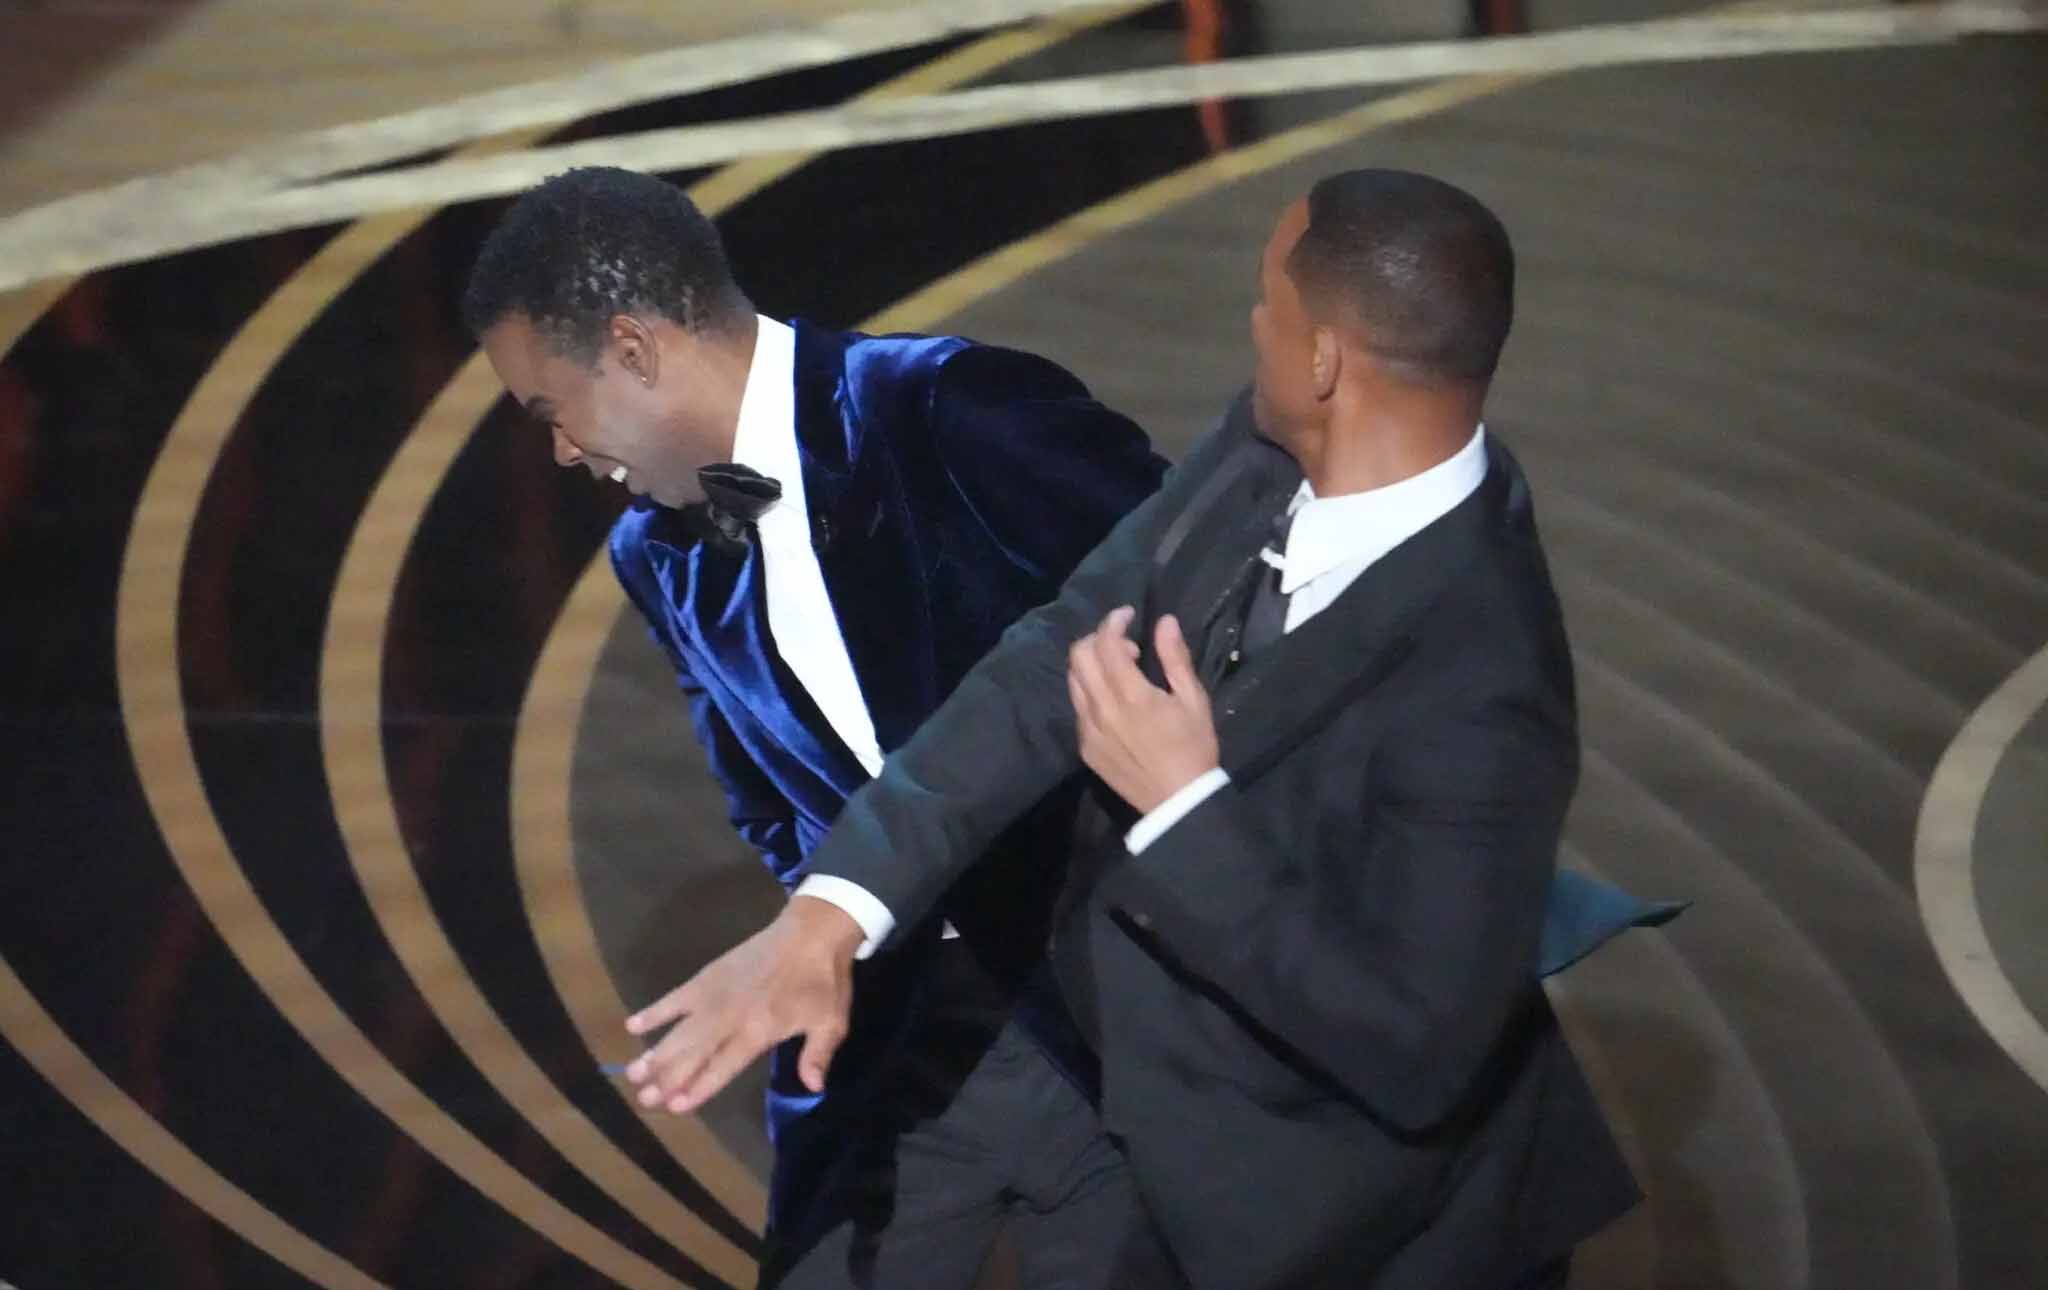 It happened after Will Smith slapped Chris Rock